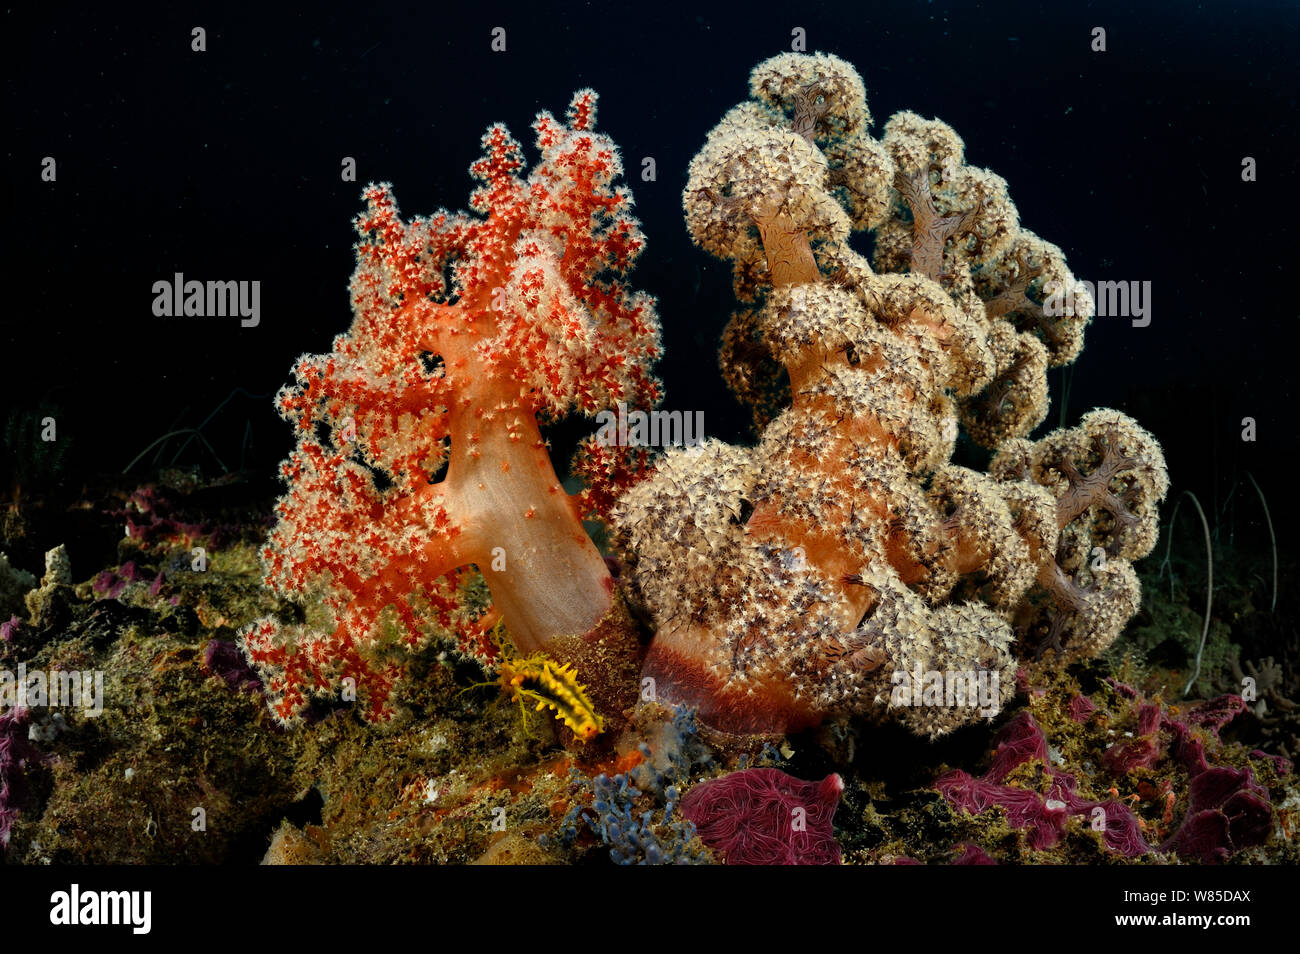 Soft corals (Dendronephthya sp) Raja Ampat, West Papua, Indonesia, Pacific Ocean. Stock Photo